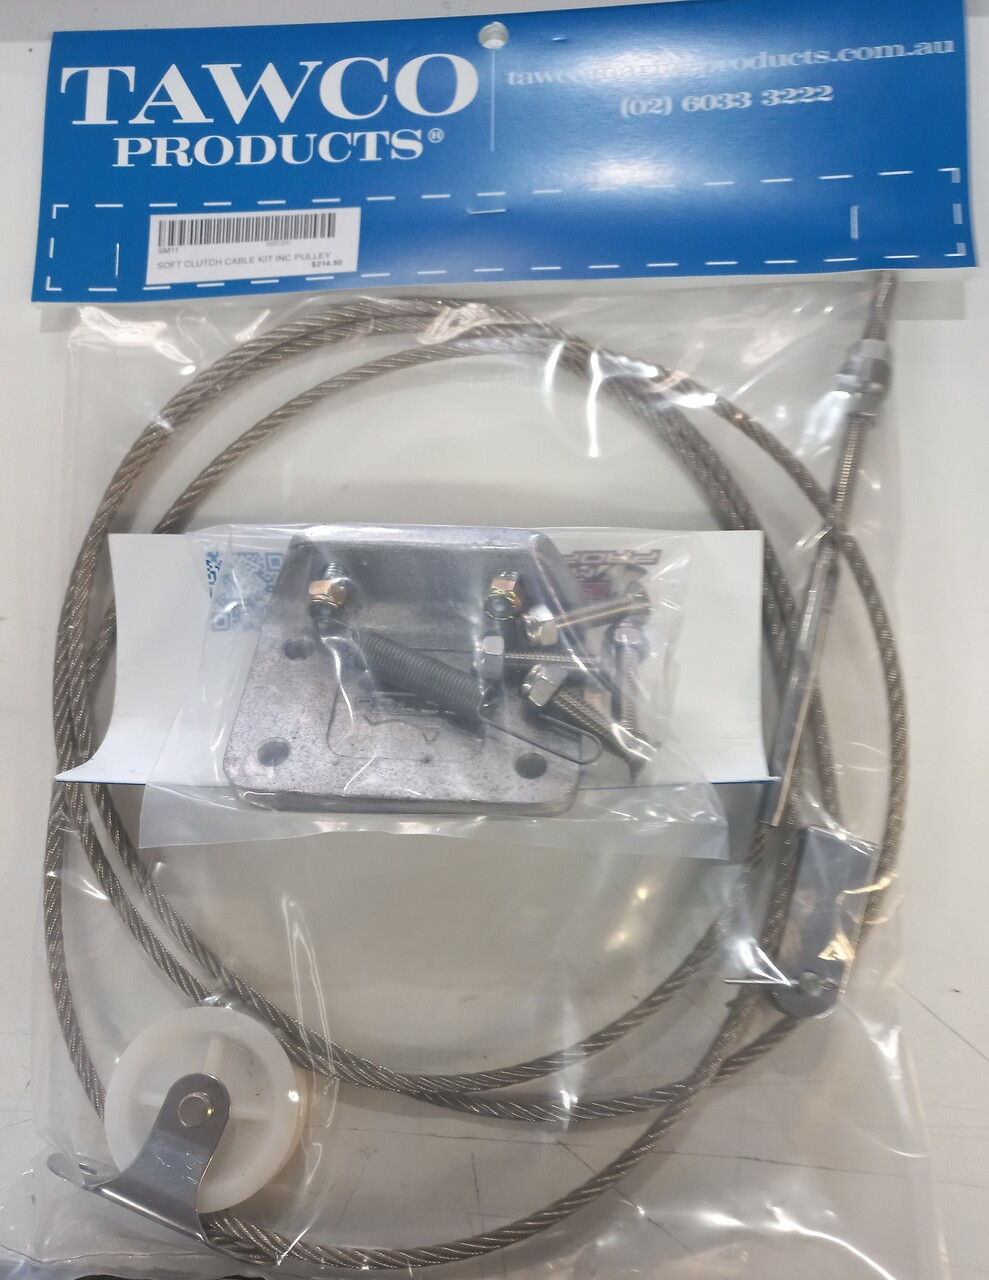 Soft Clutch cable kit including pulley and floor bracket